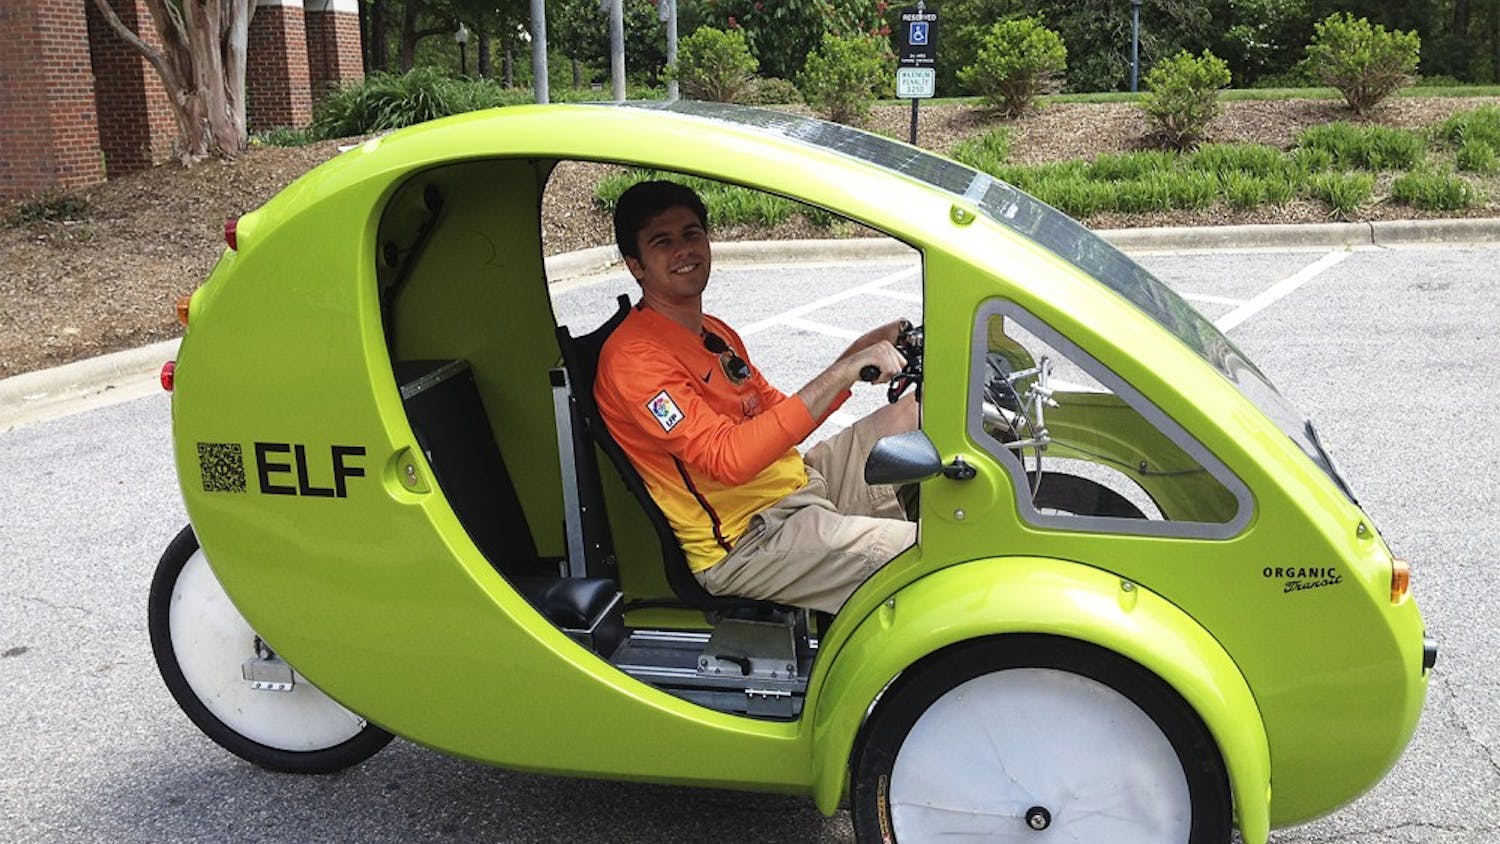 Patrick White, a senior business major, tests out an alternative form of transportation, a one-person-electrical bicycle called an ELF, in the parking lot of Kenan-Flagler on Monday afternoon.